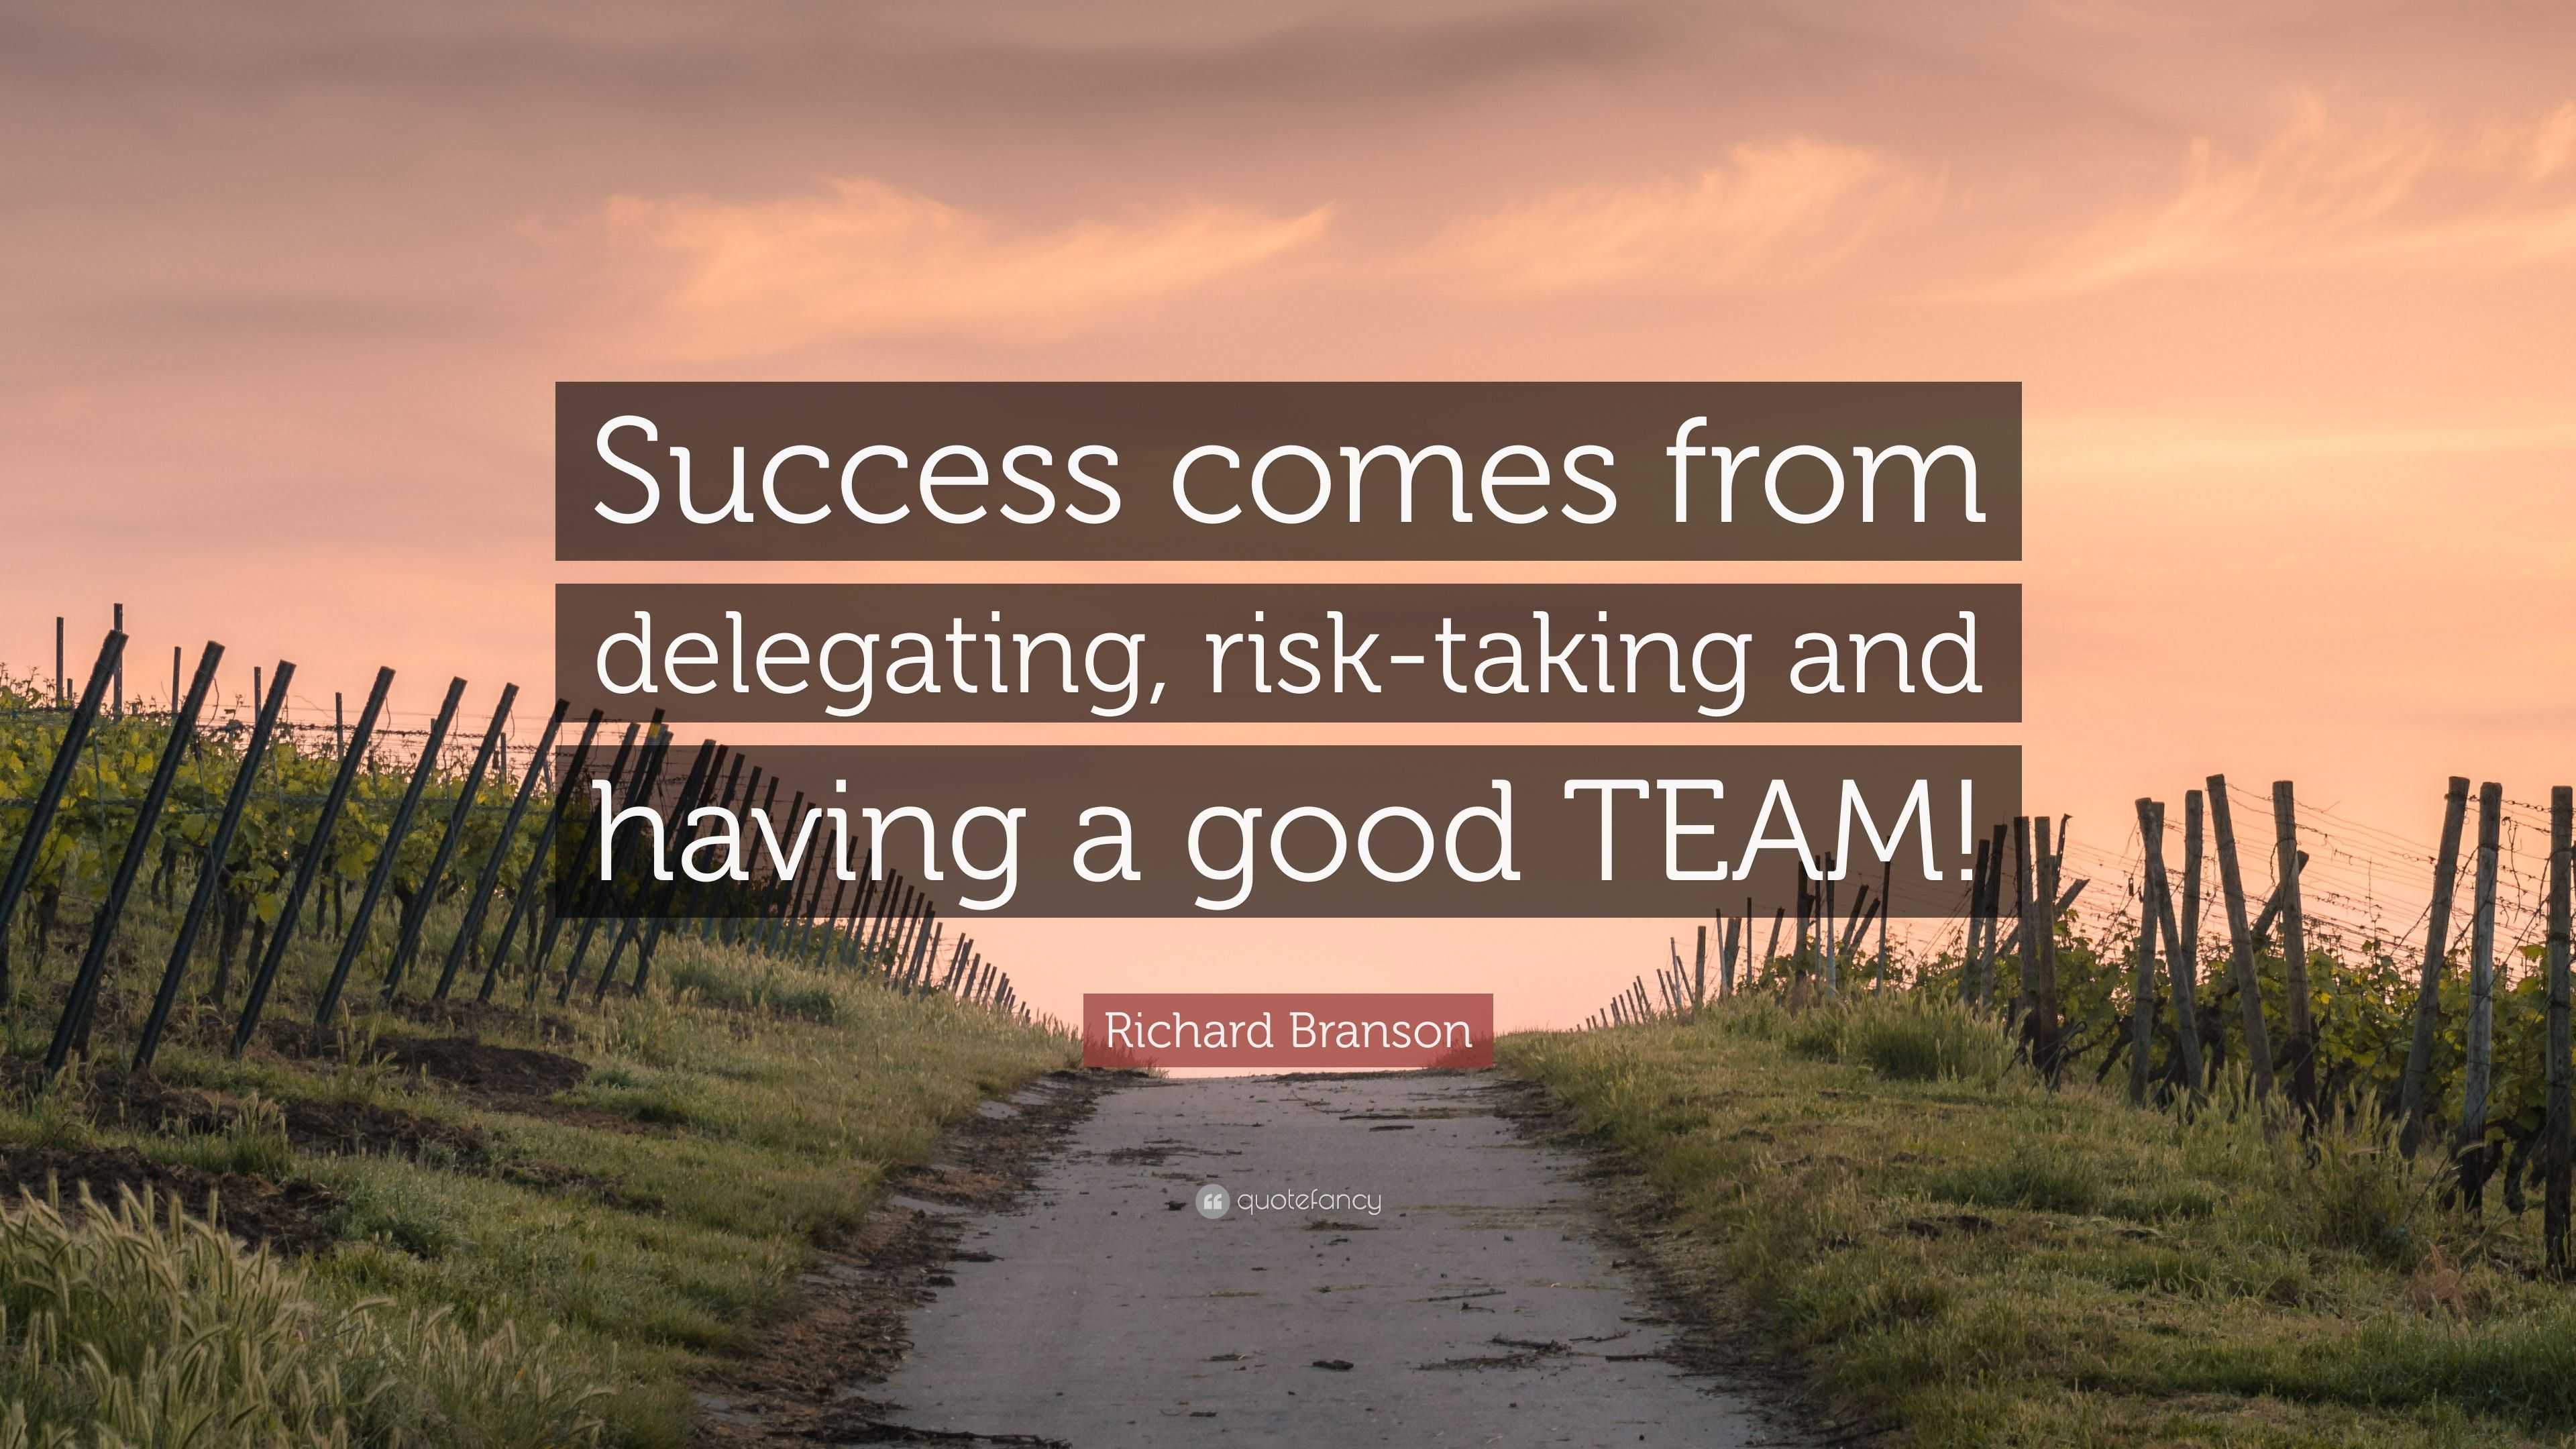 Richard Branson Quote Success comes from delegating 